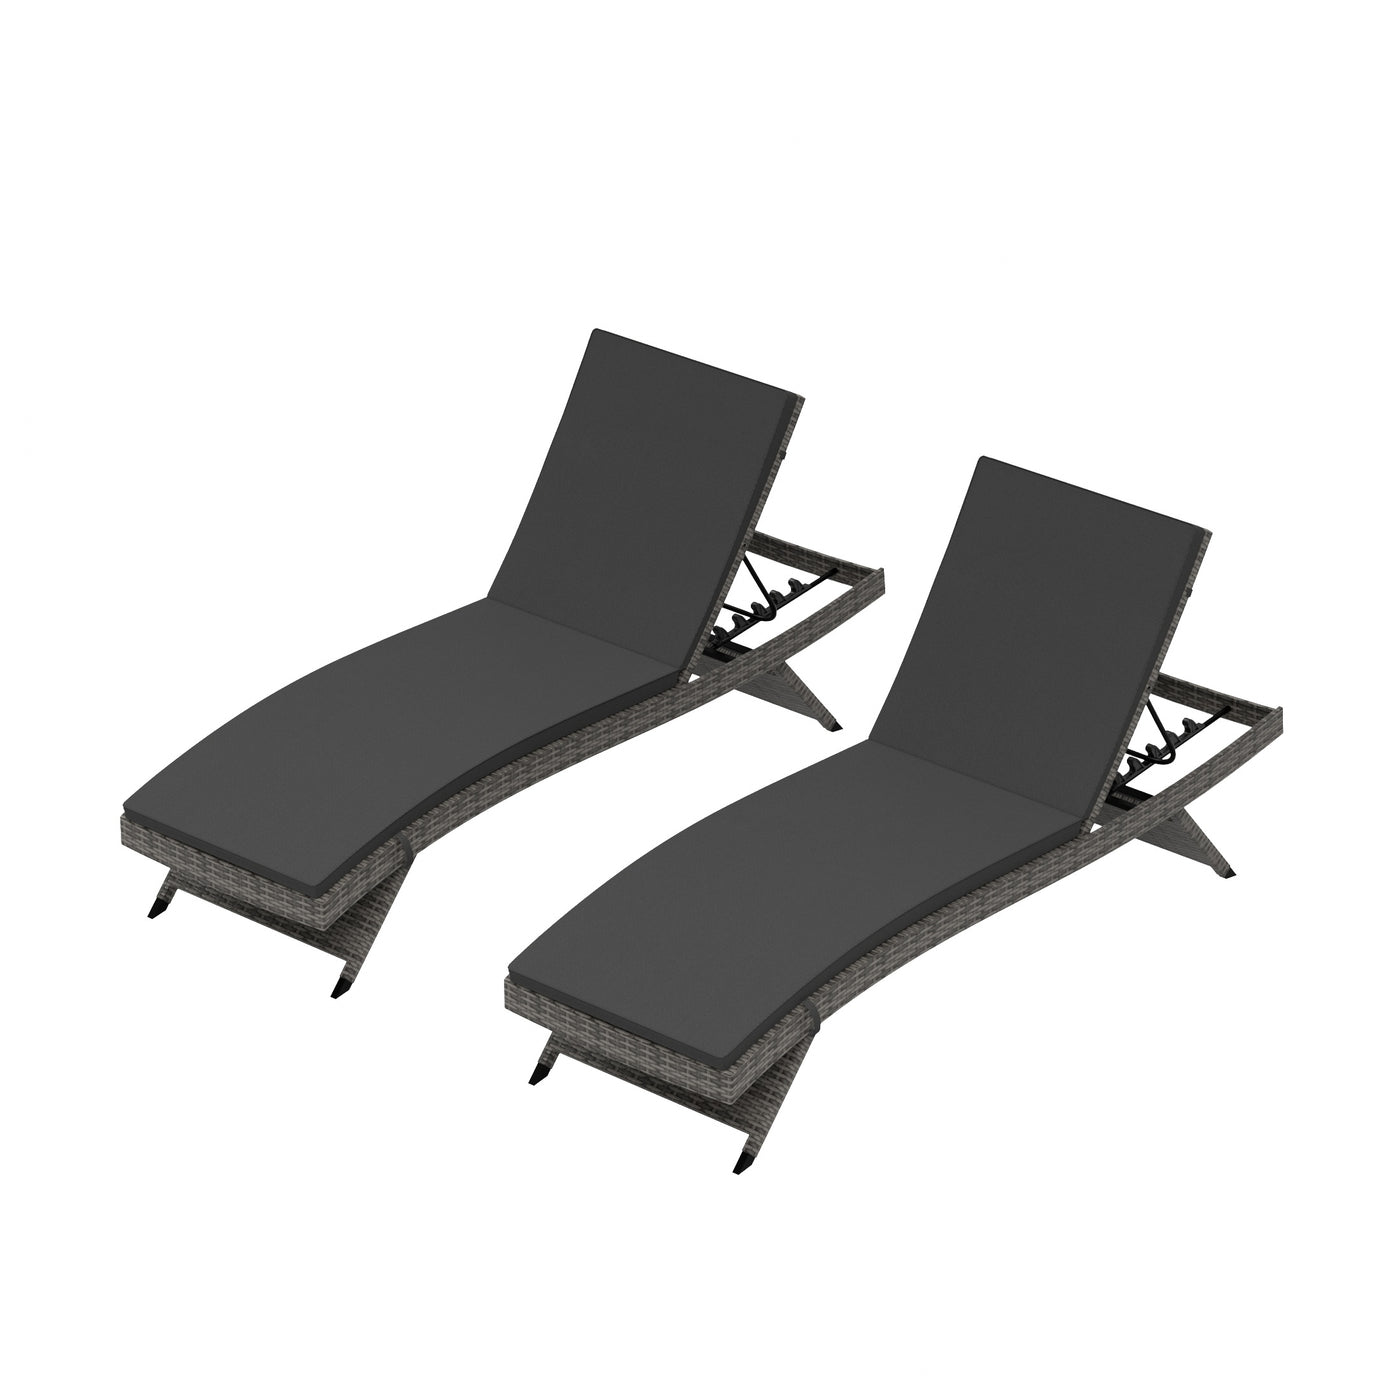 Somerset Grey Rattan Wicker Chaise Lounge with Cushion (Set of 2)